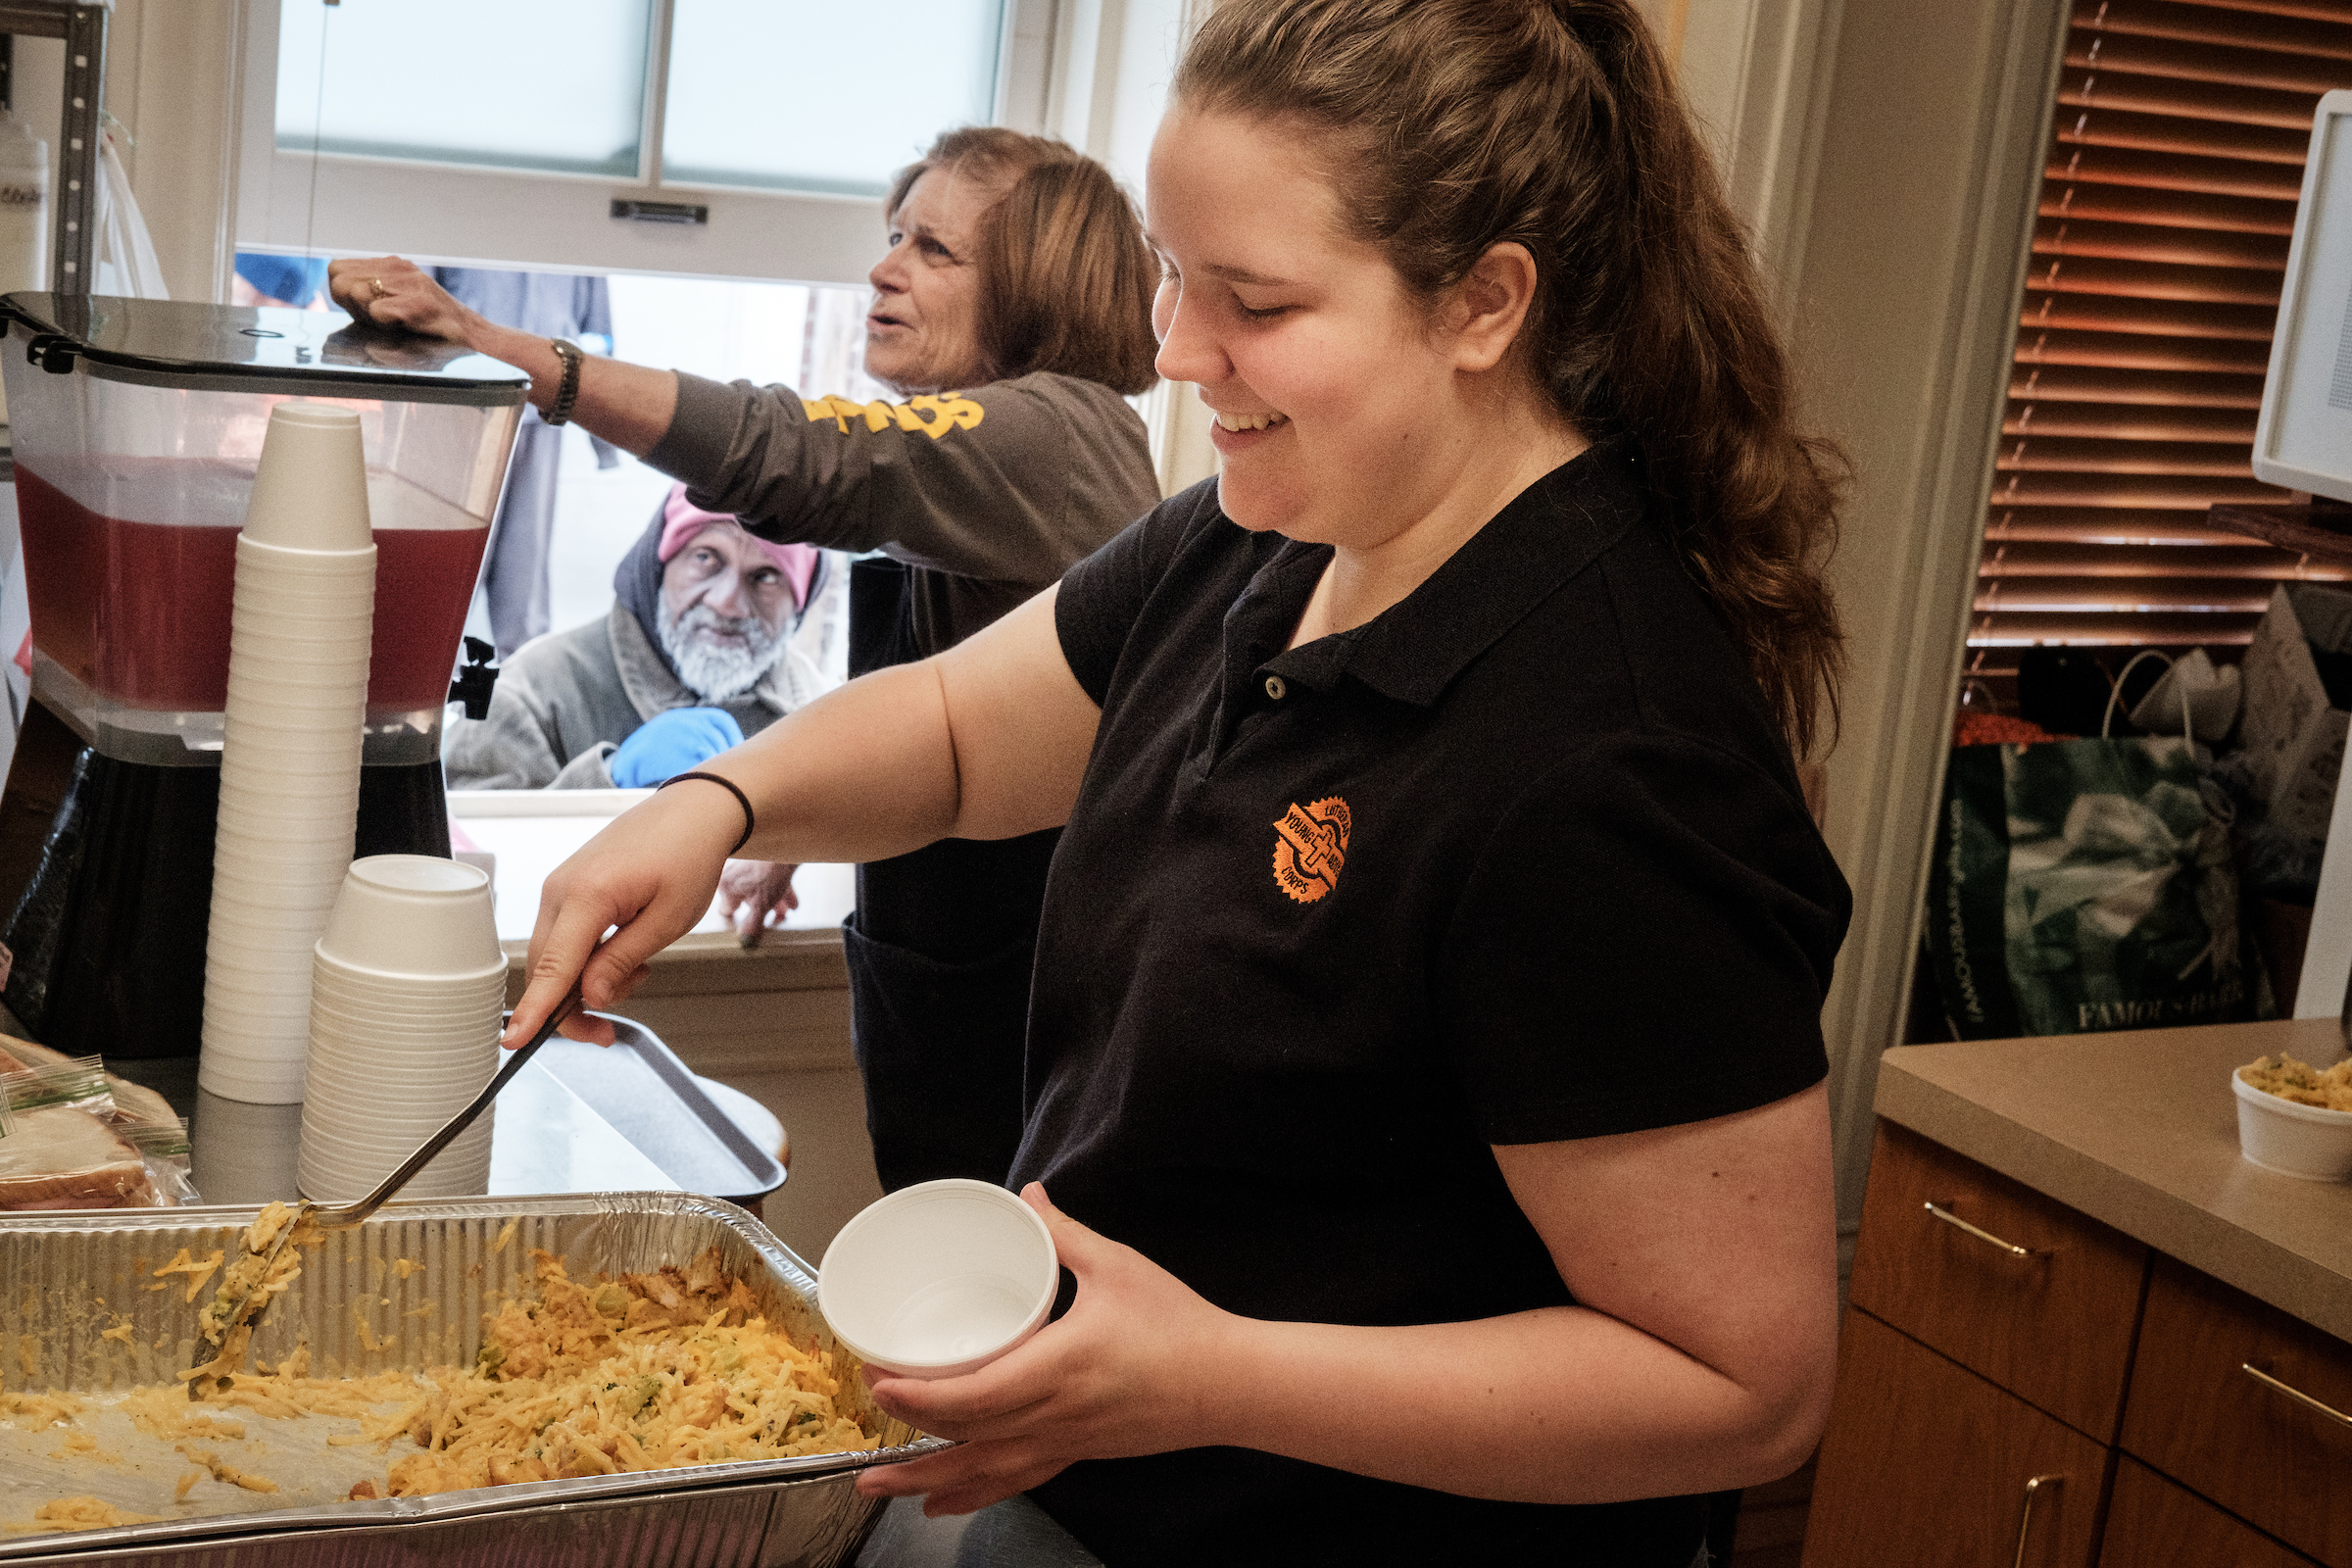 Young Adult Corps participant Lara McComack helps distribute food with Cecelia Andres to homeless men and women early Thursday, April 19, 2018, at Trinity Lutheran Church, St. Louis. LCMS Communications/Erik M. Lunsford